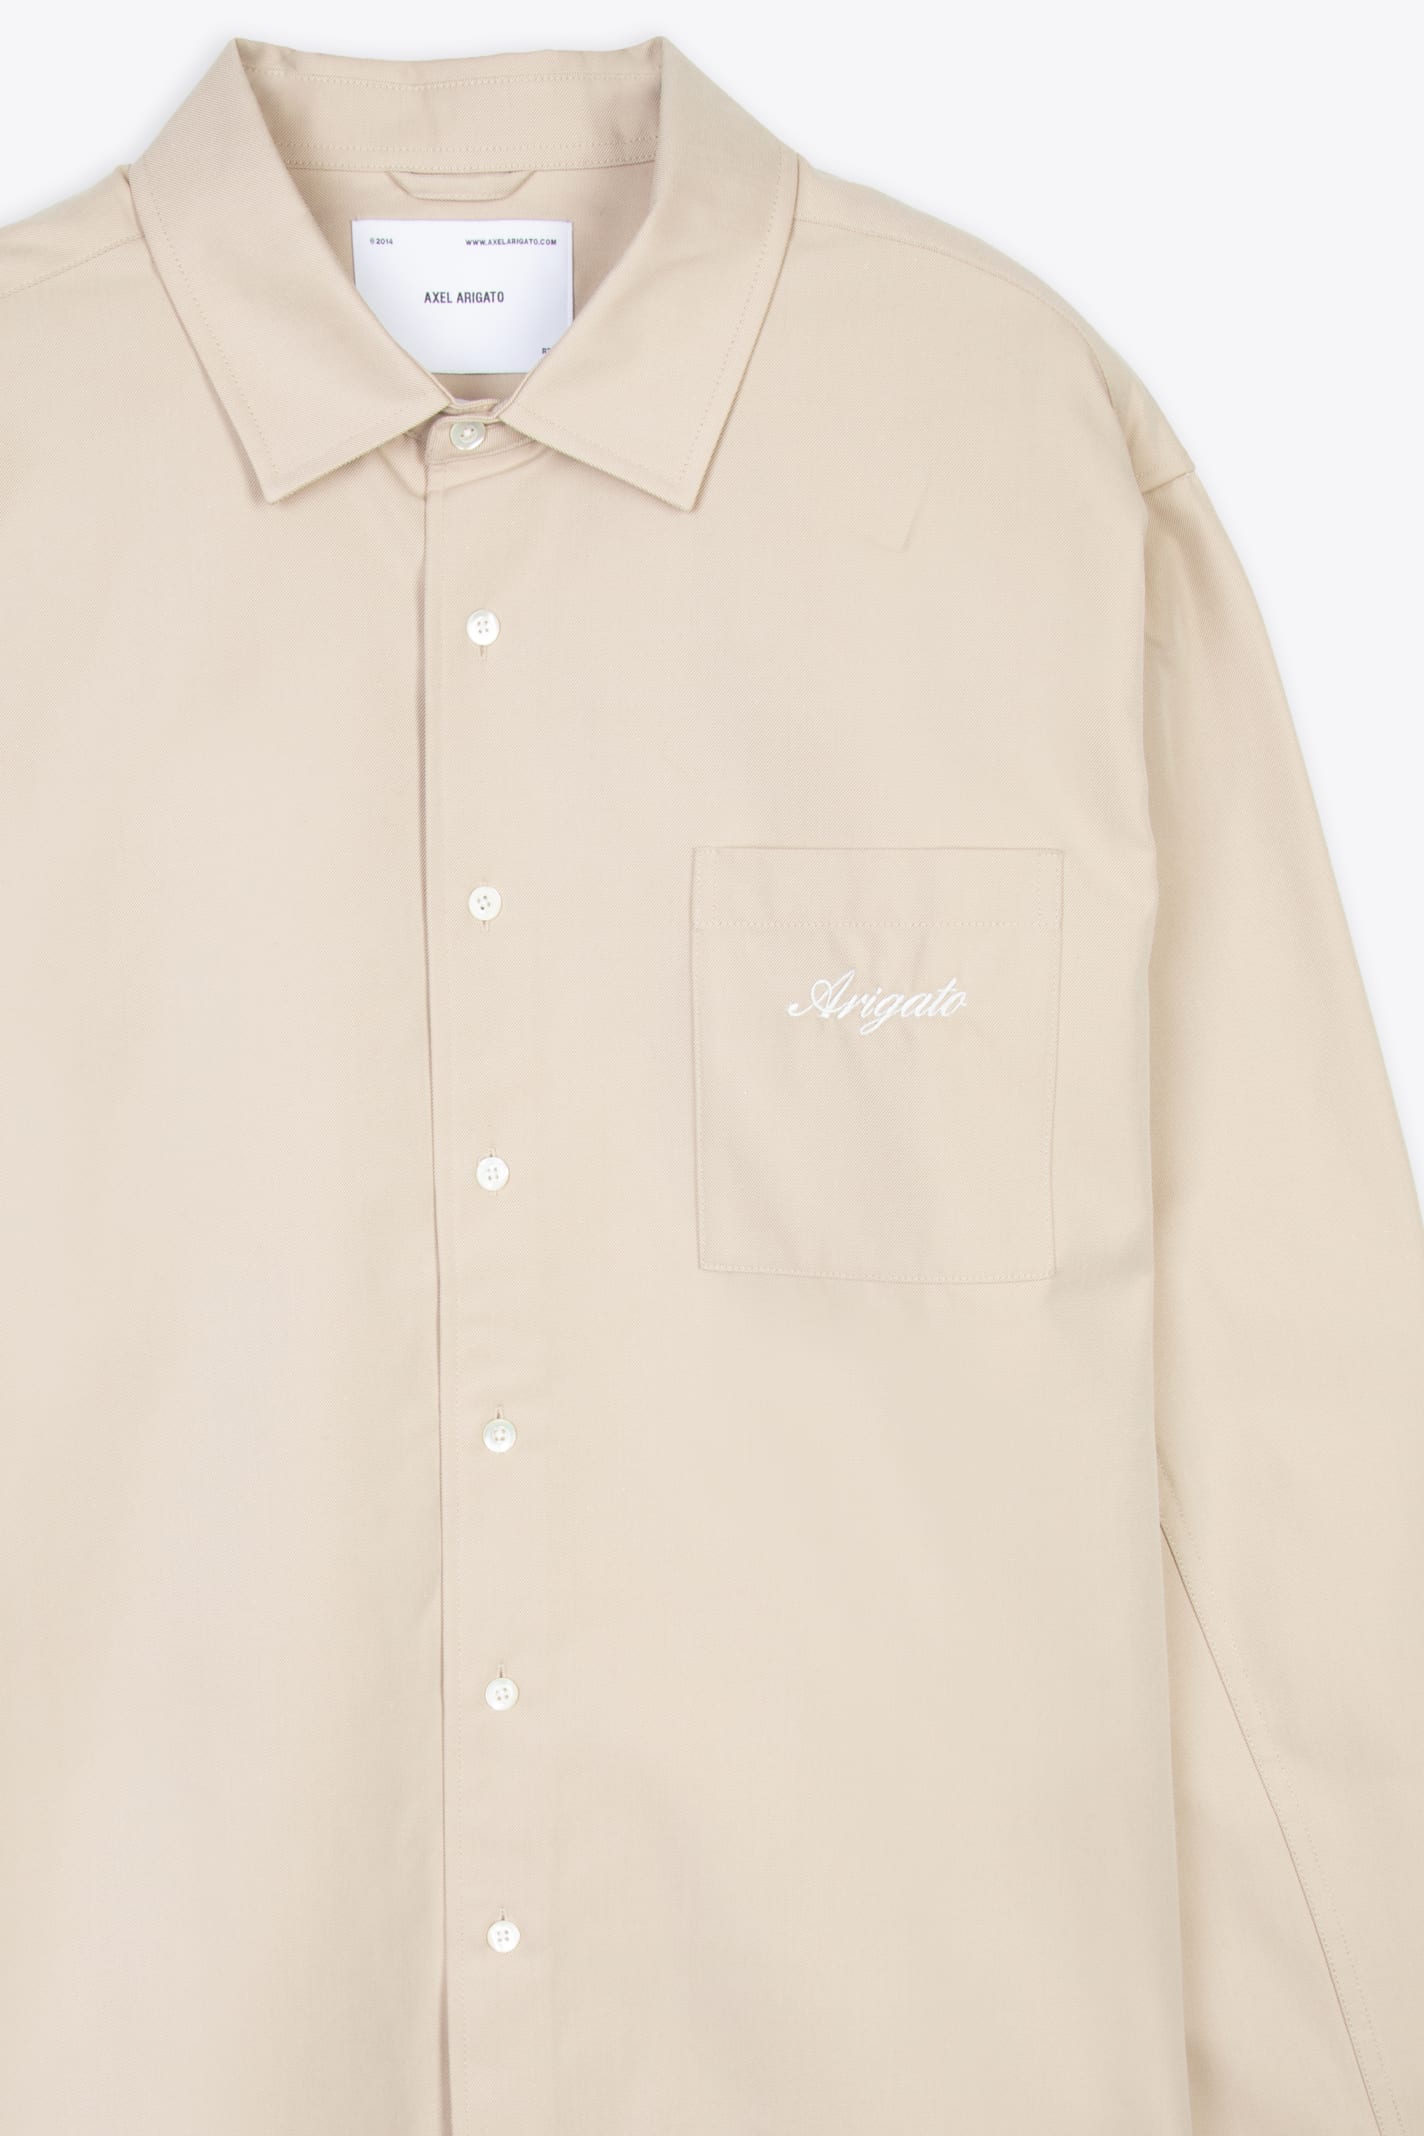 Shop Axel Arigato Flow Overshirt Beige Shirt With Chest Pocket And Logo - Flow Overshirt